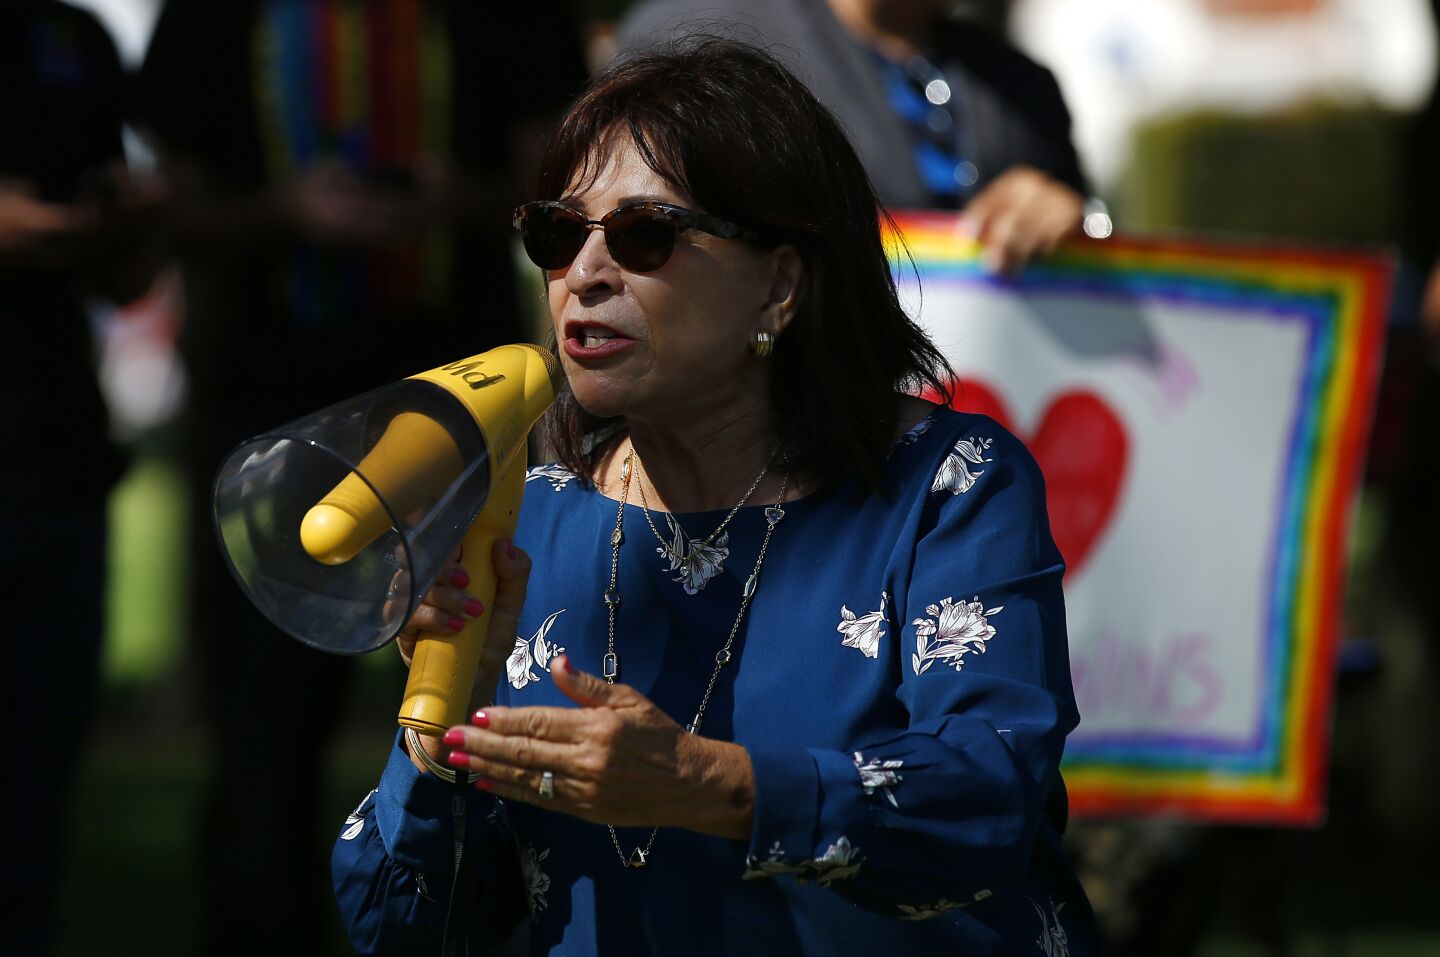 Mary Salas, Mayor of Chula Vista voices her support during a rally before Drag Queen Story Time at the Chula Vista Civic Center Library on Sept. 10, 2019.